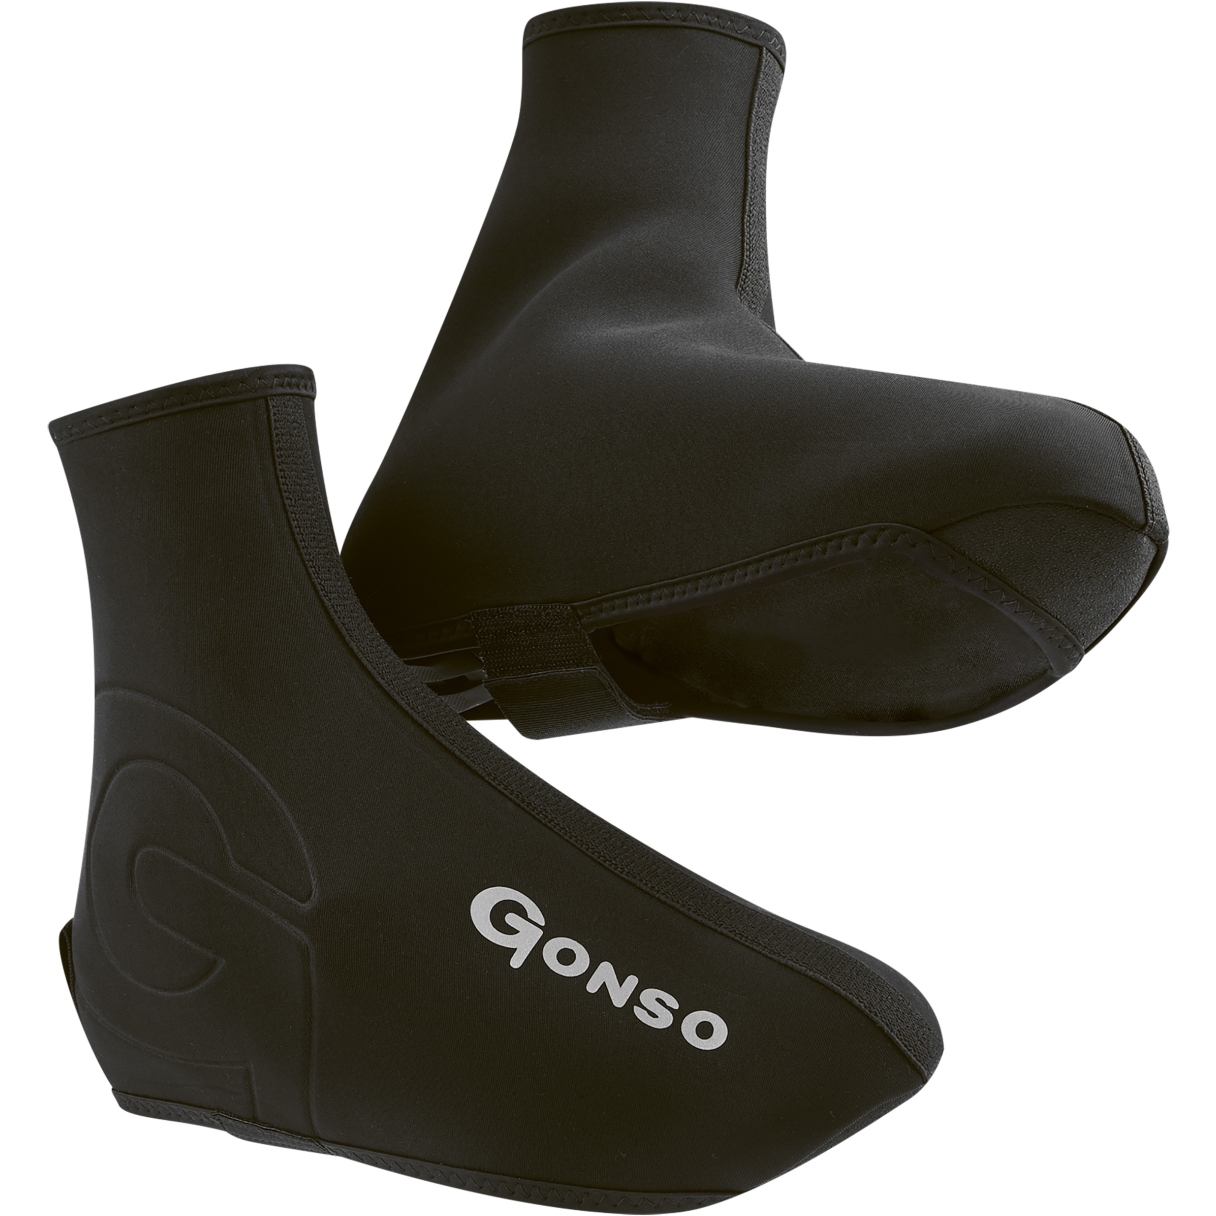 Picture of Gonso Thermal Shoe Cover - Black